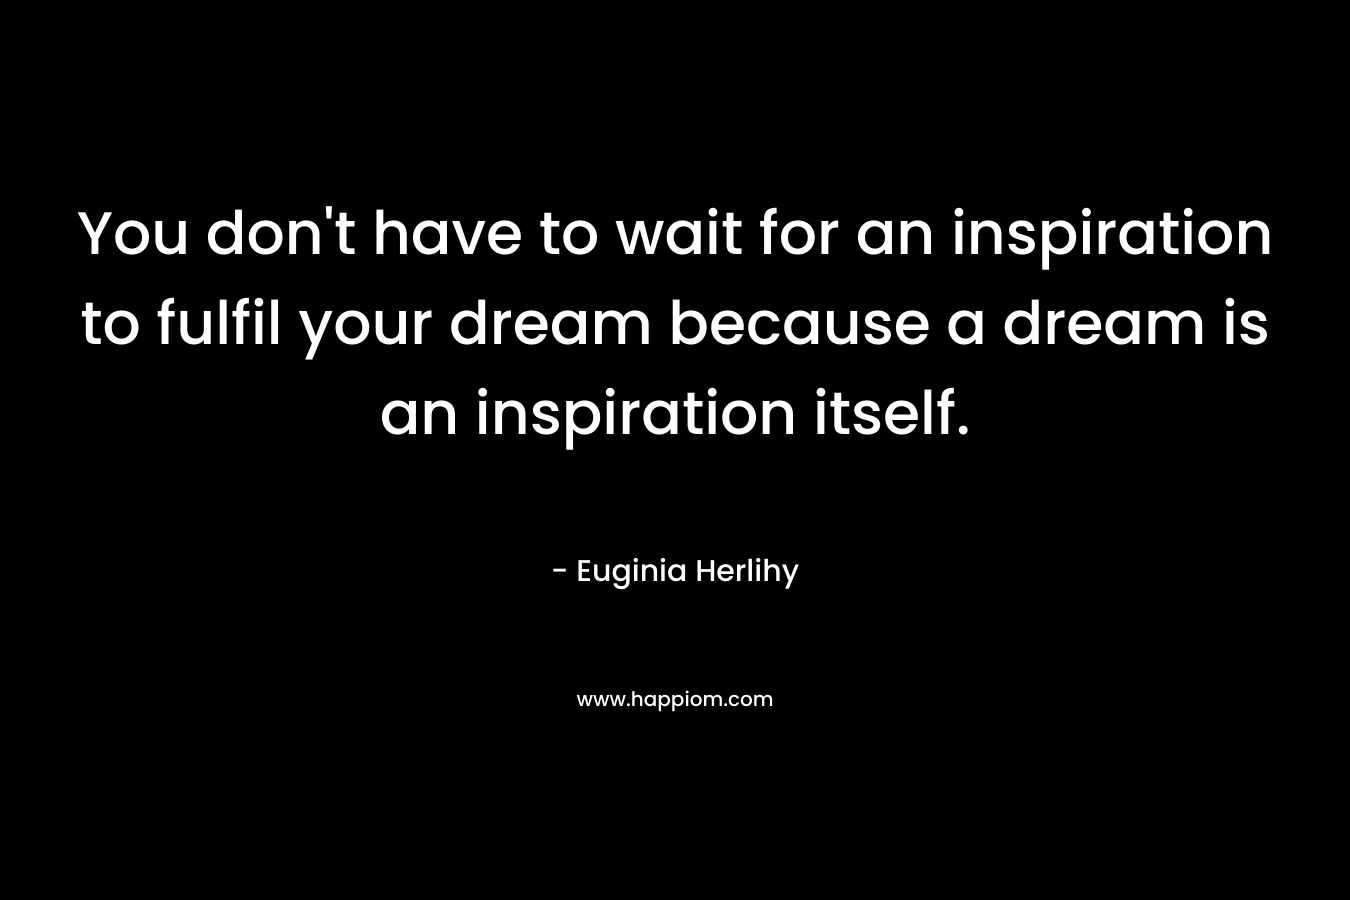 You don’t have to wait for an inspiration to fulfil your dream because a dream is an inspiration itself. – Euginia Herlihy